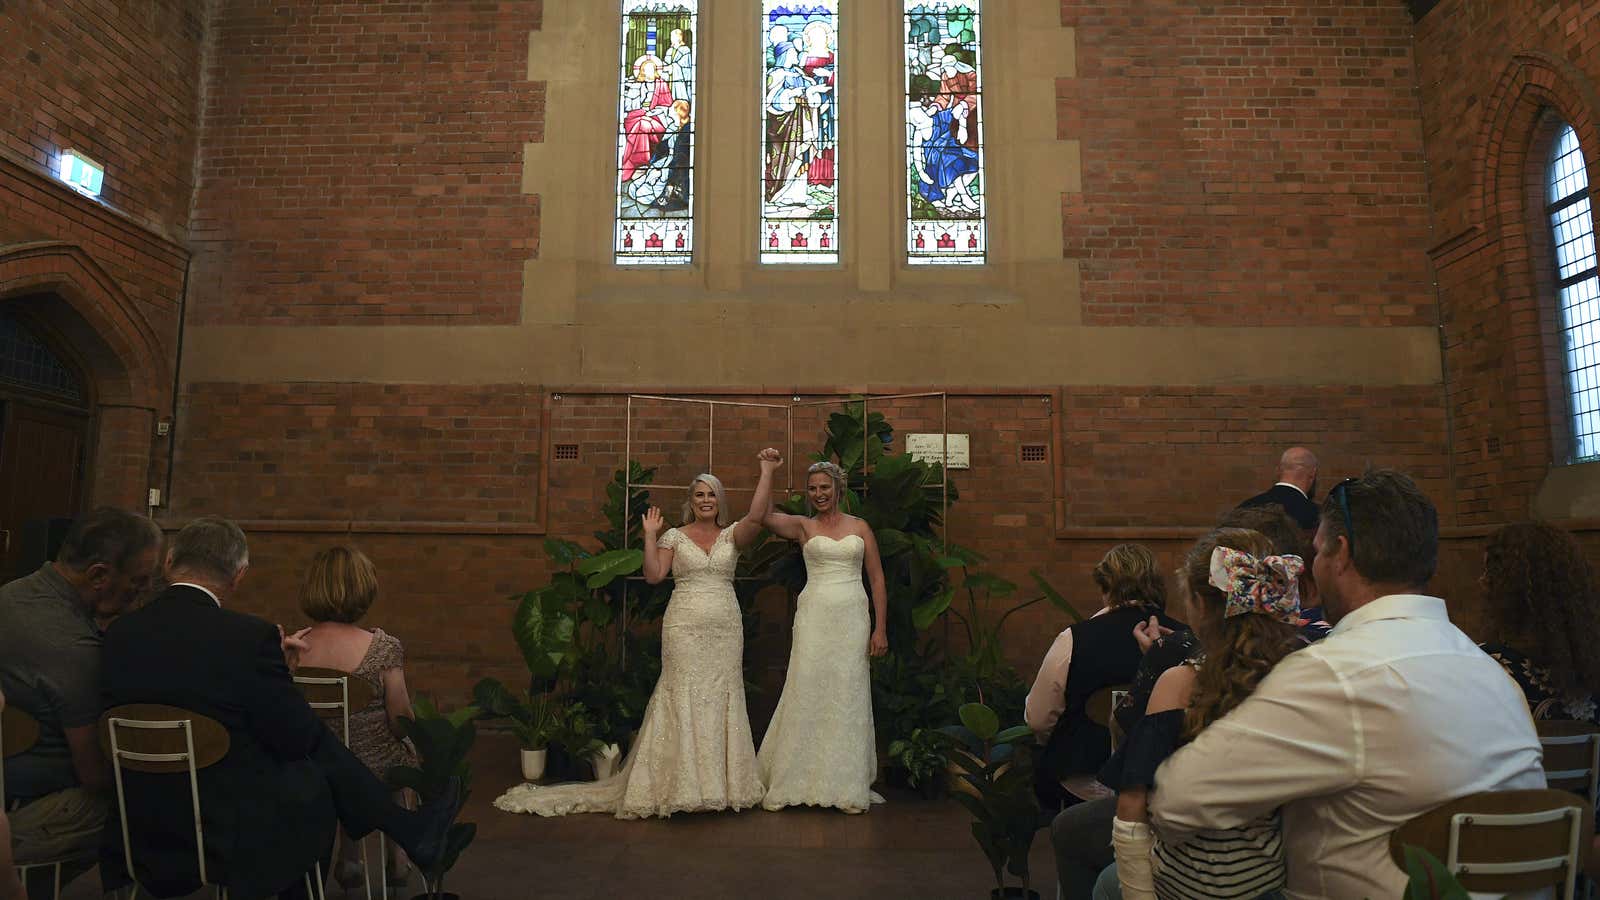 Rebecca Hickson and Sarah Turnbull married today in Newcastle, Australia.